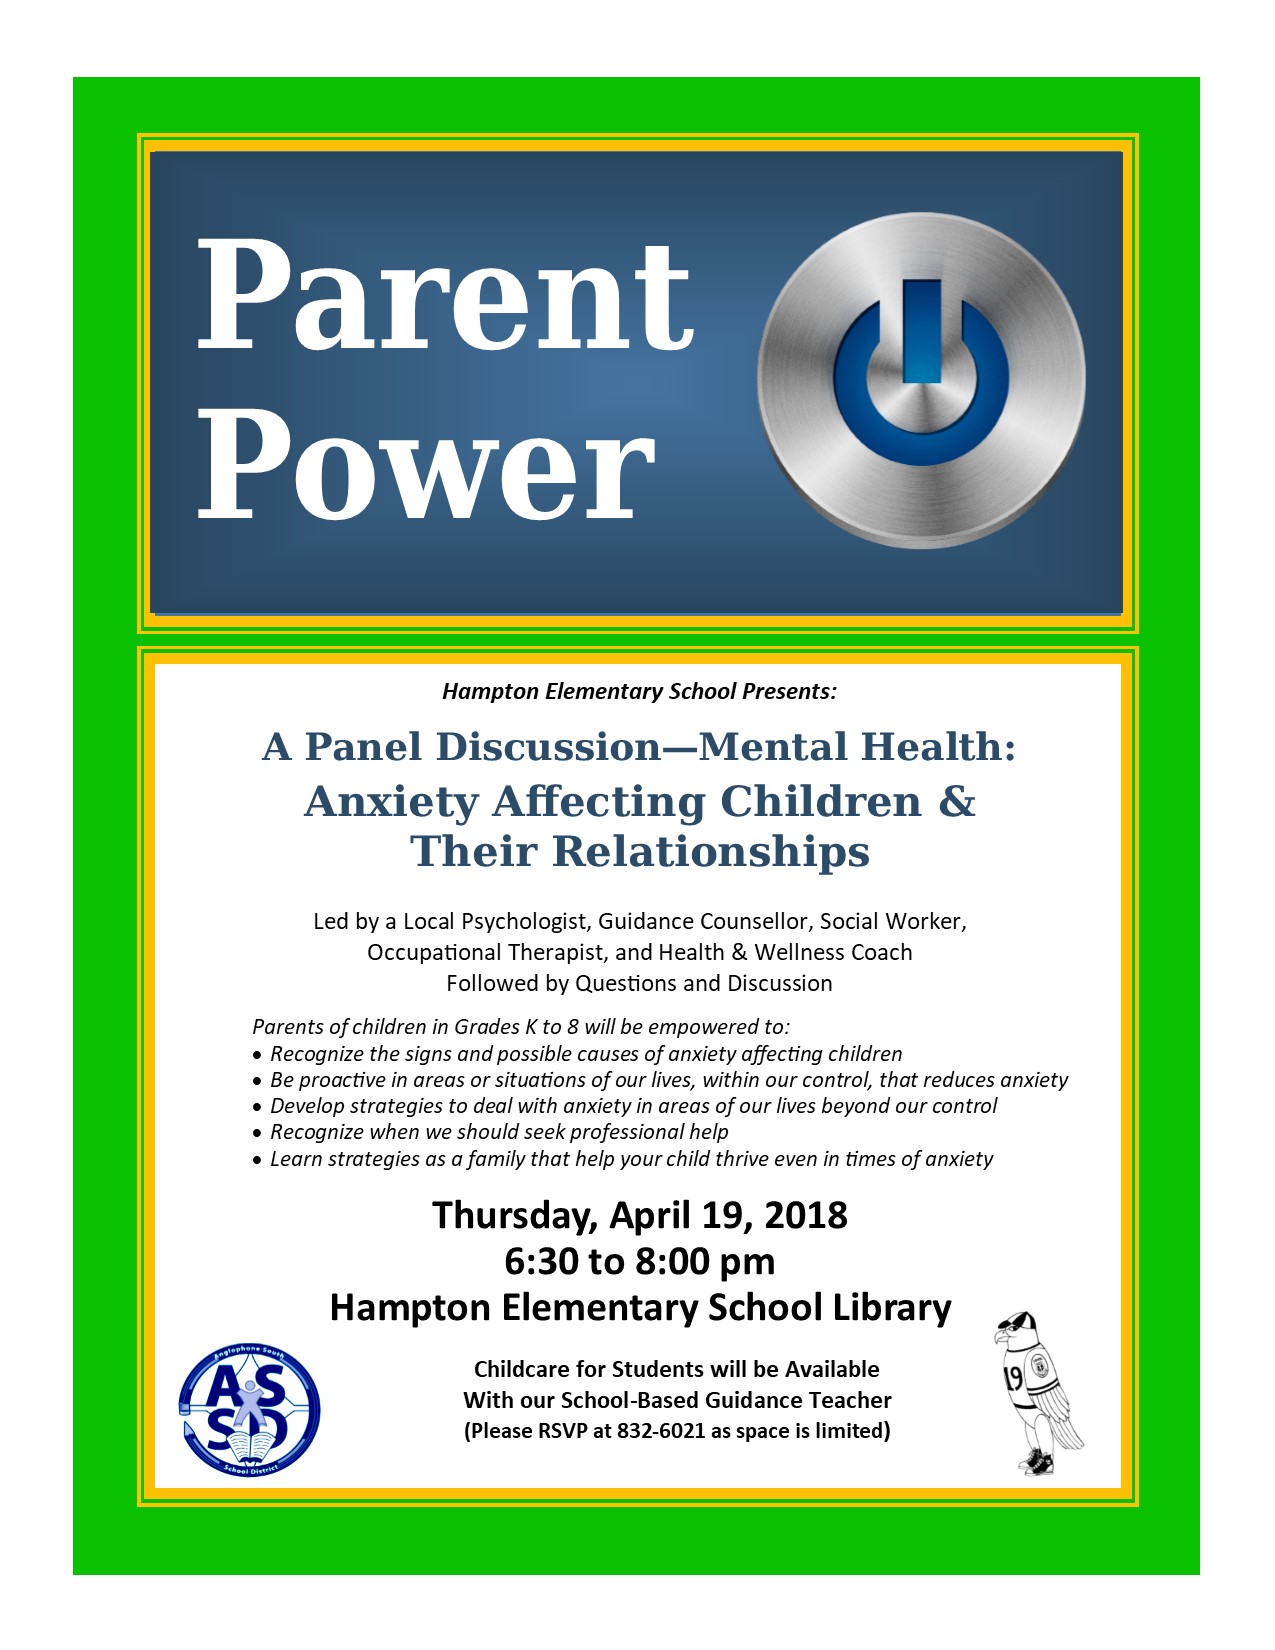 Parent Power Night Dealing with Anxiety poster.jpg